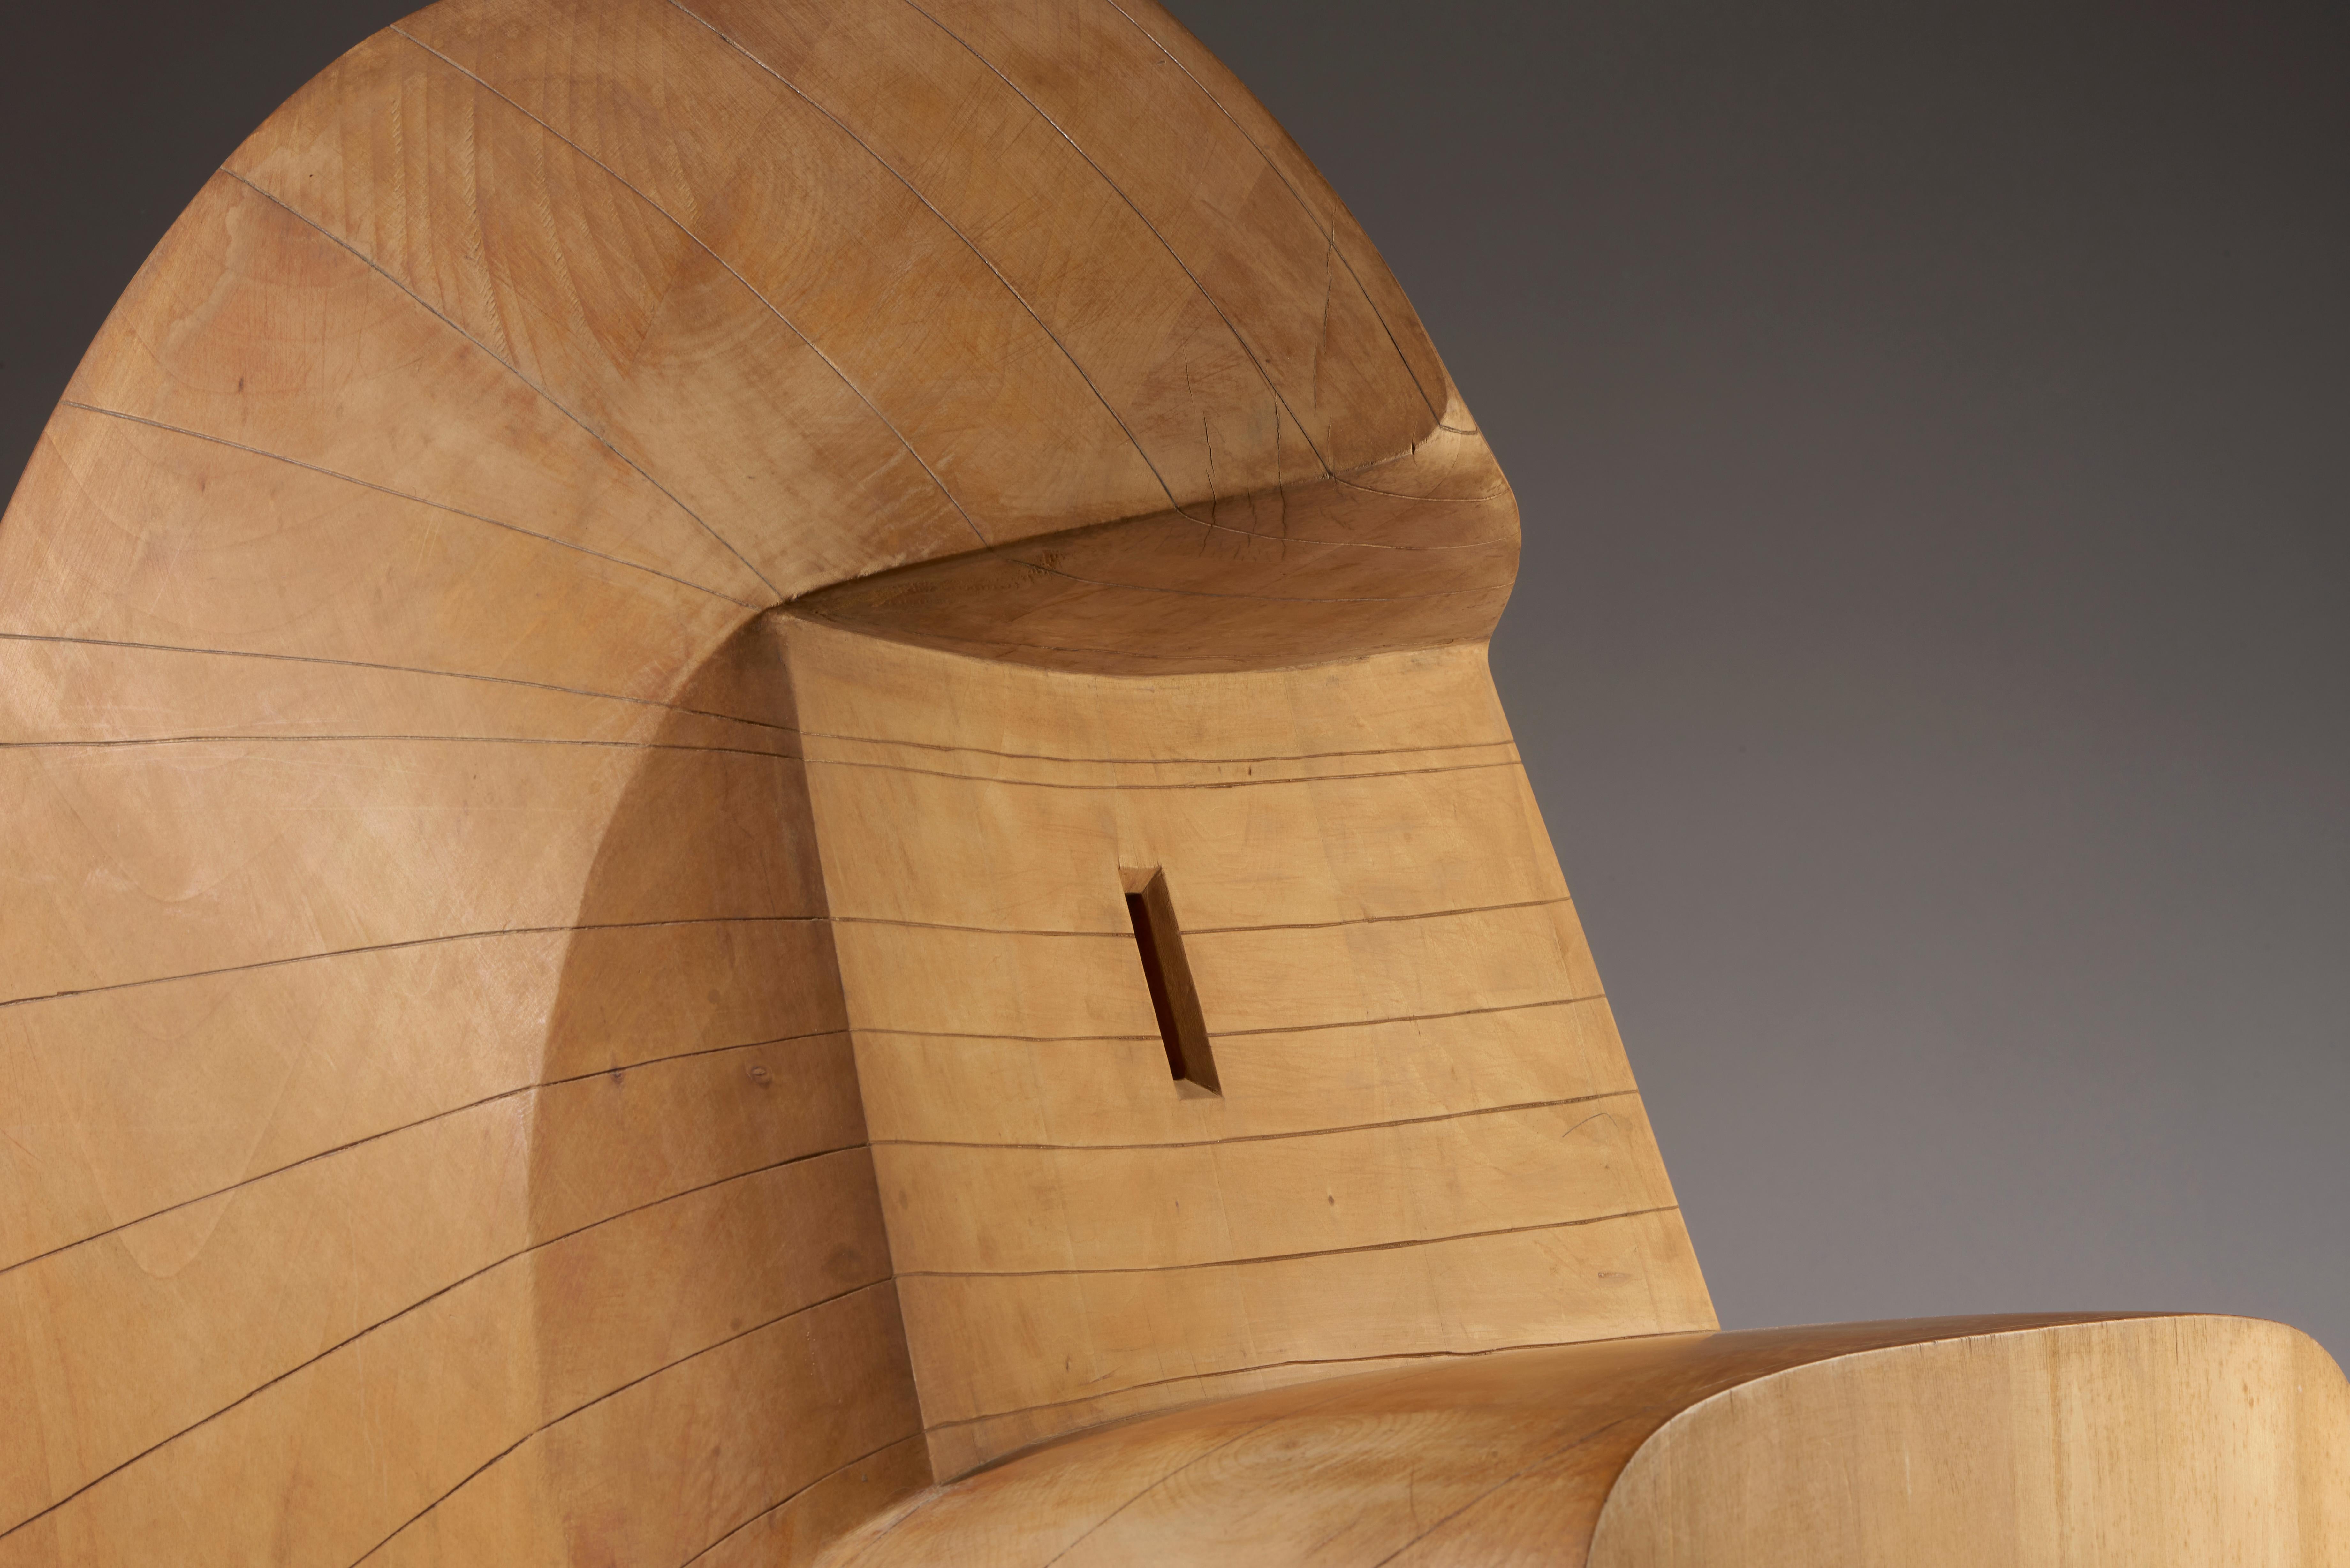 Giuseppe Rivadossi (Nave, July 8, 1935)  Shed, 1974 Wood sculpture For Sale 5